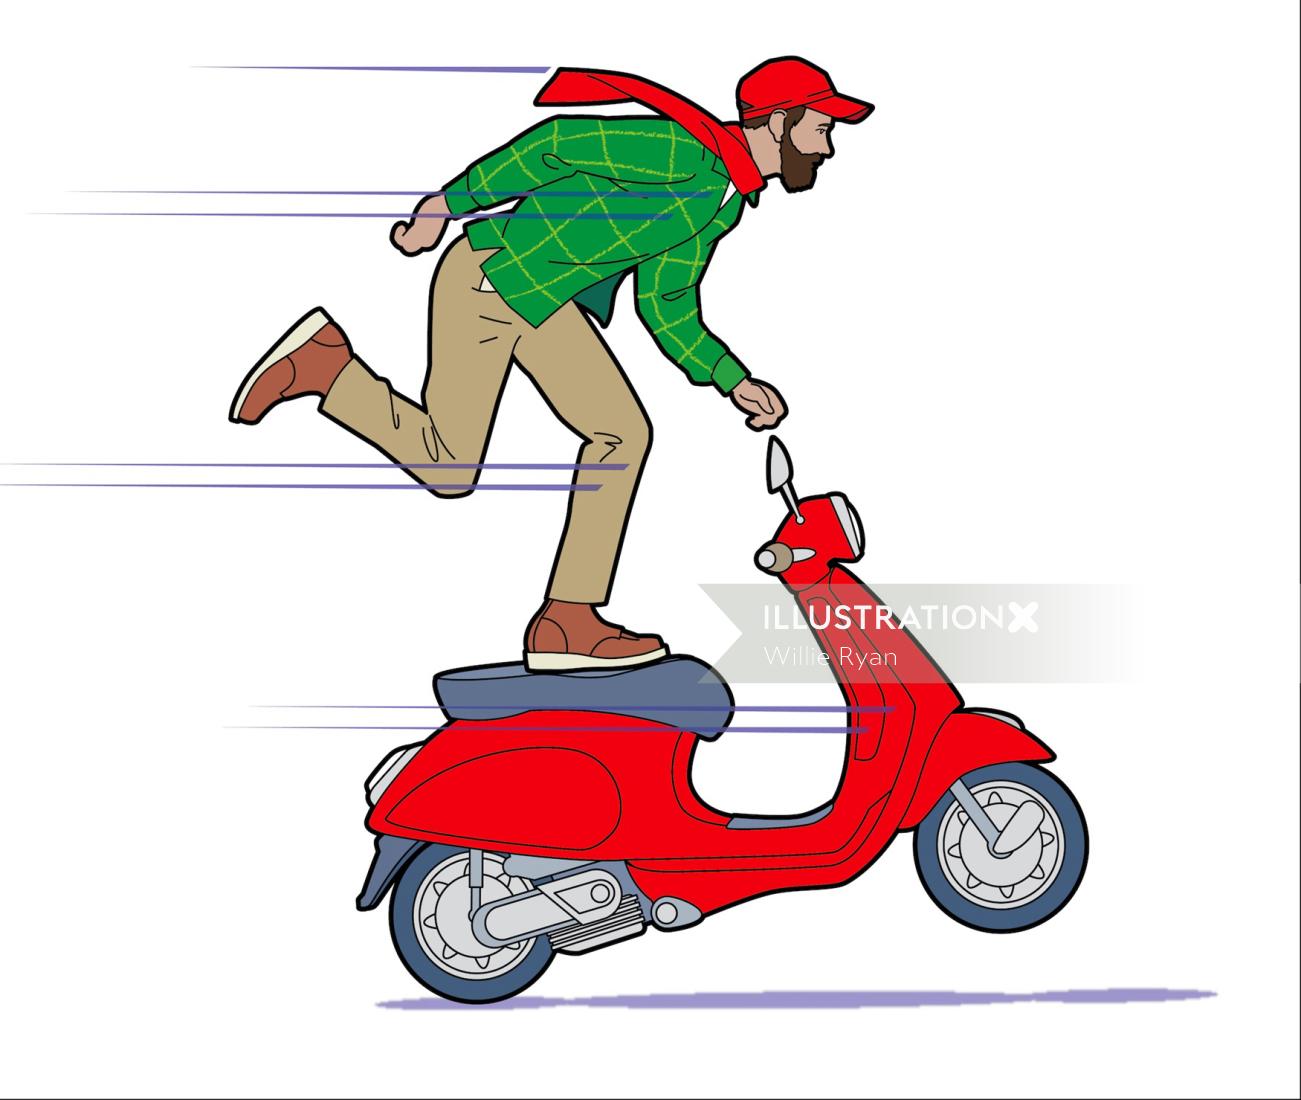 scooter, man on scooter, vespa, man balancing, red scooter, joy ride, hipsterGraphic illustration of